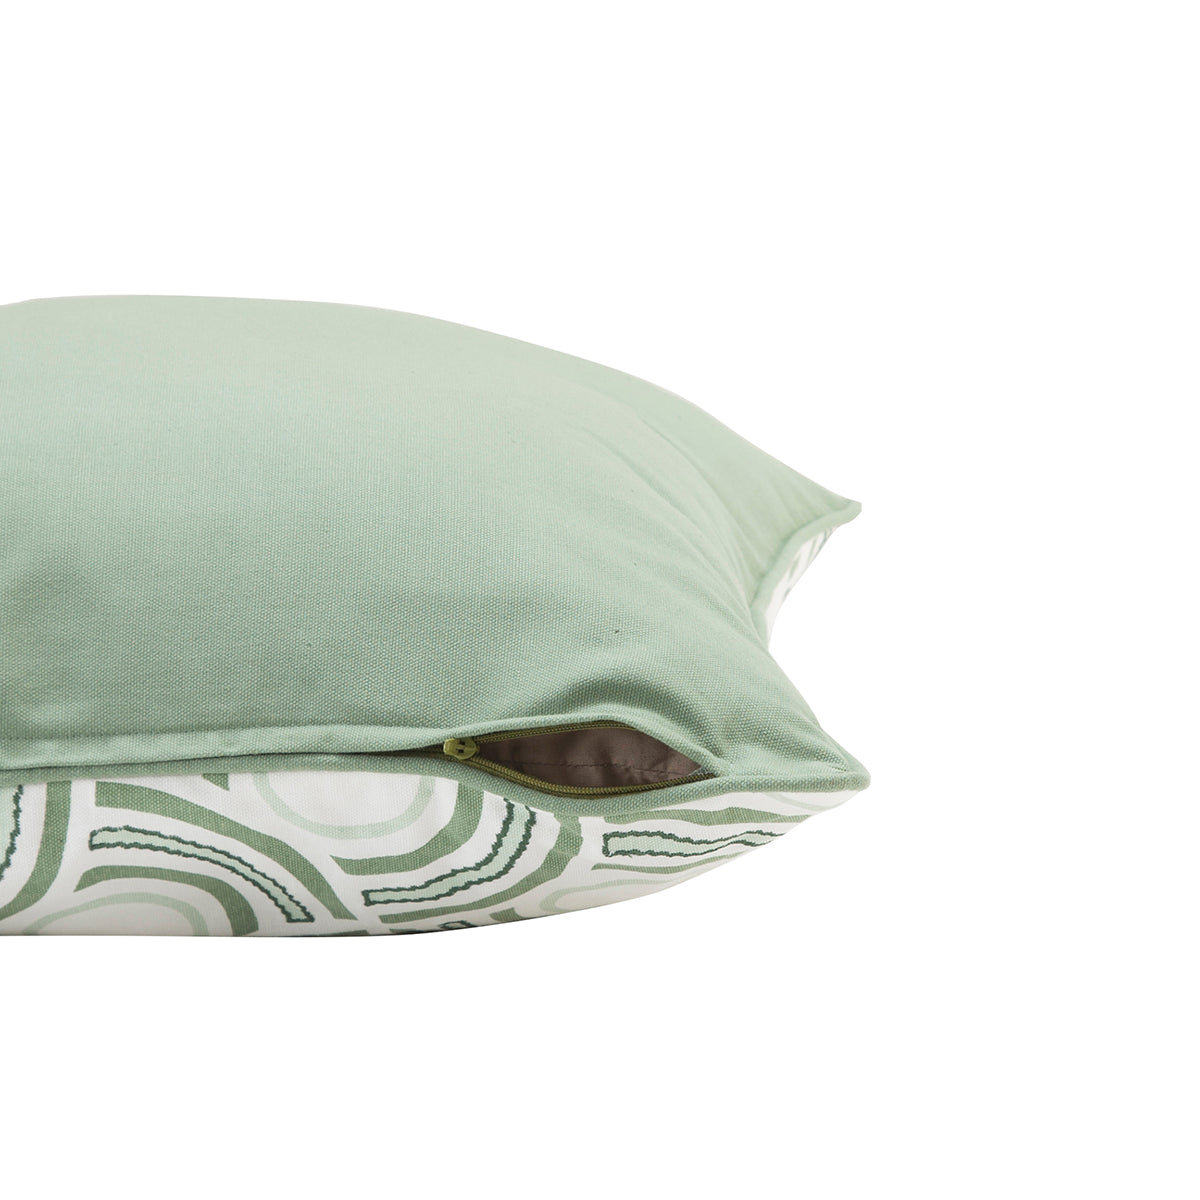 Spherical Wings Printed & Embroidered Cushion Cover